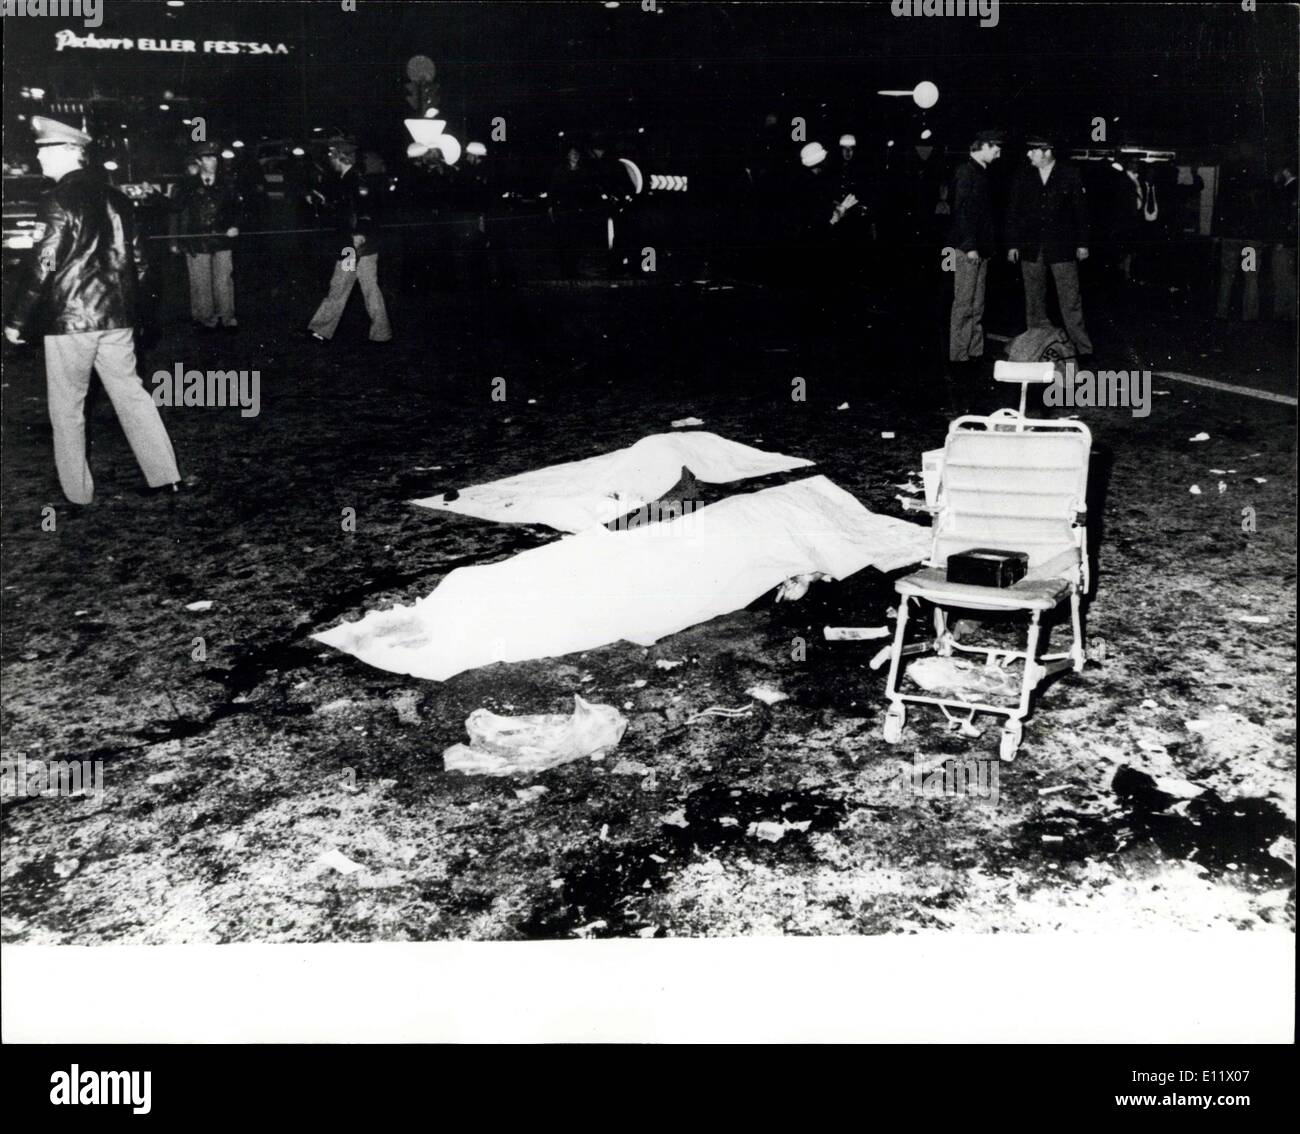 Sep. 29, 1980 - 14 Killed And Many Injured In The Munich ...